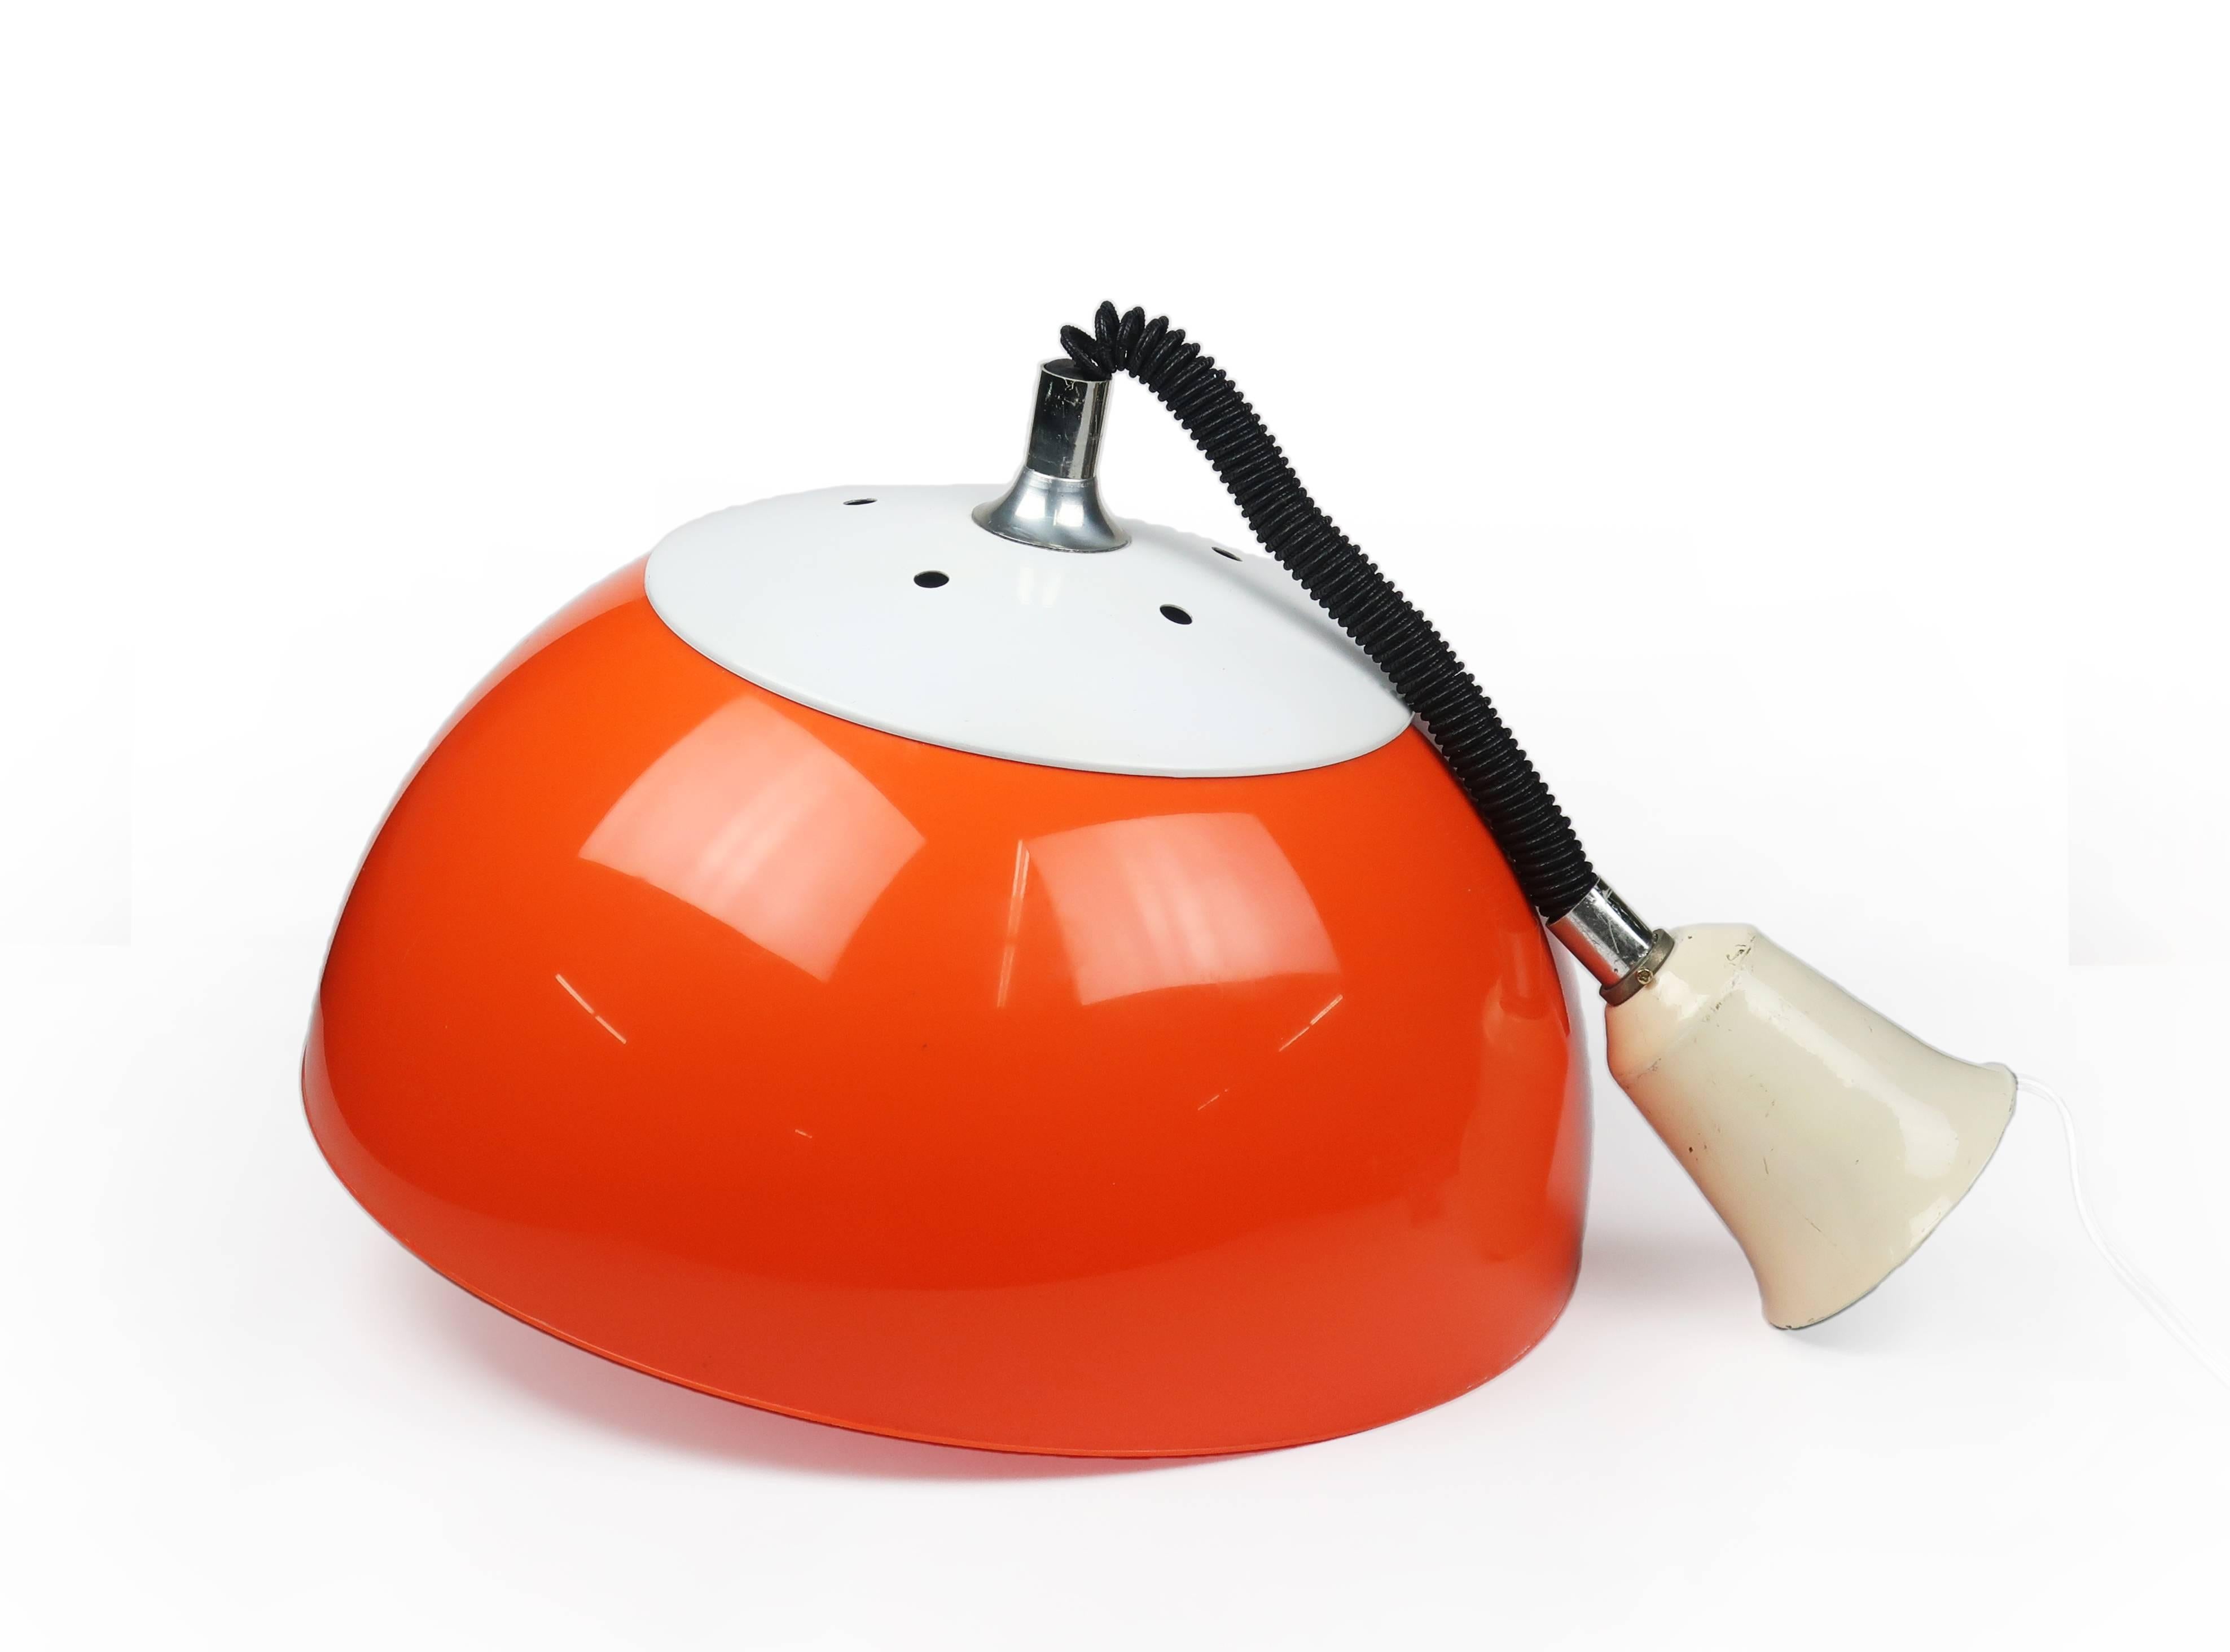 Large 1970s Italian Modern orange retractable pendant lamp in excellent vintage condition. This perfect pop-styled lamp has a chrome handle below the orange plastic shade to pull the light down or push it up to the required height. (Stays in place